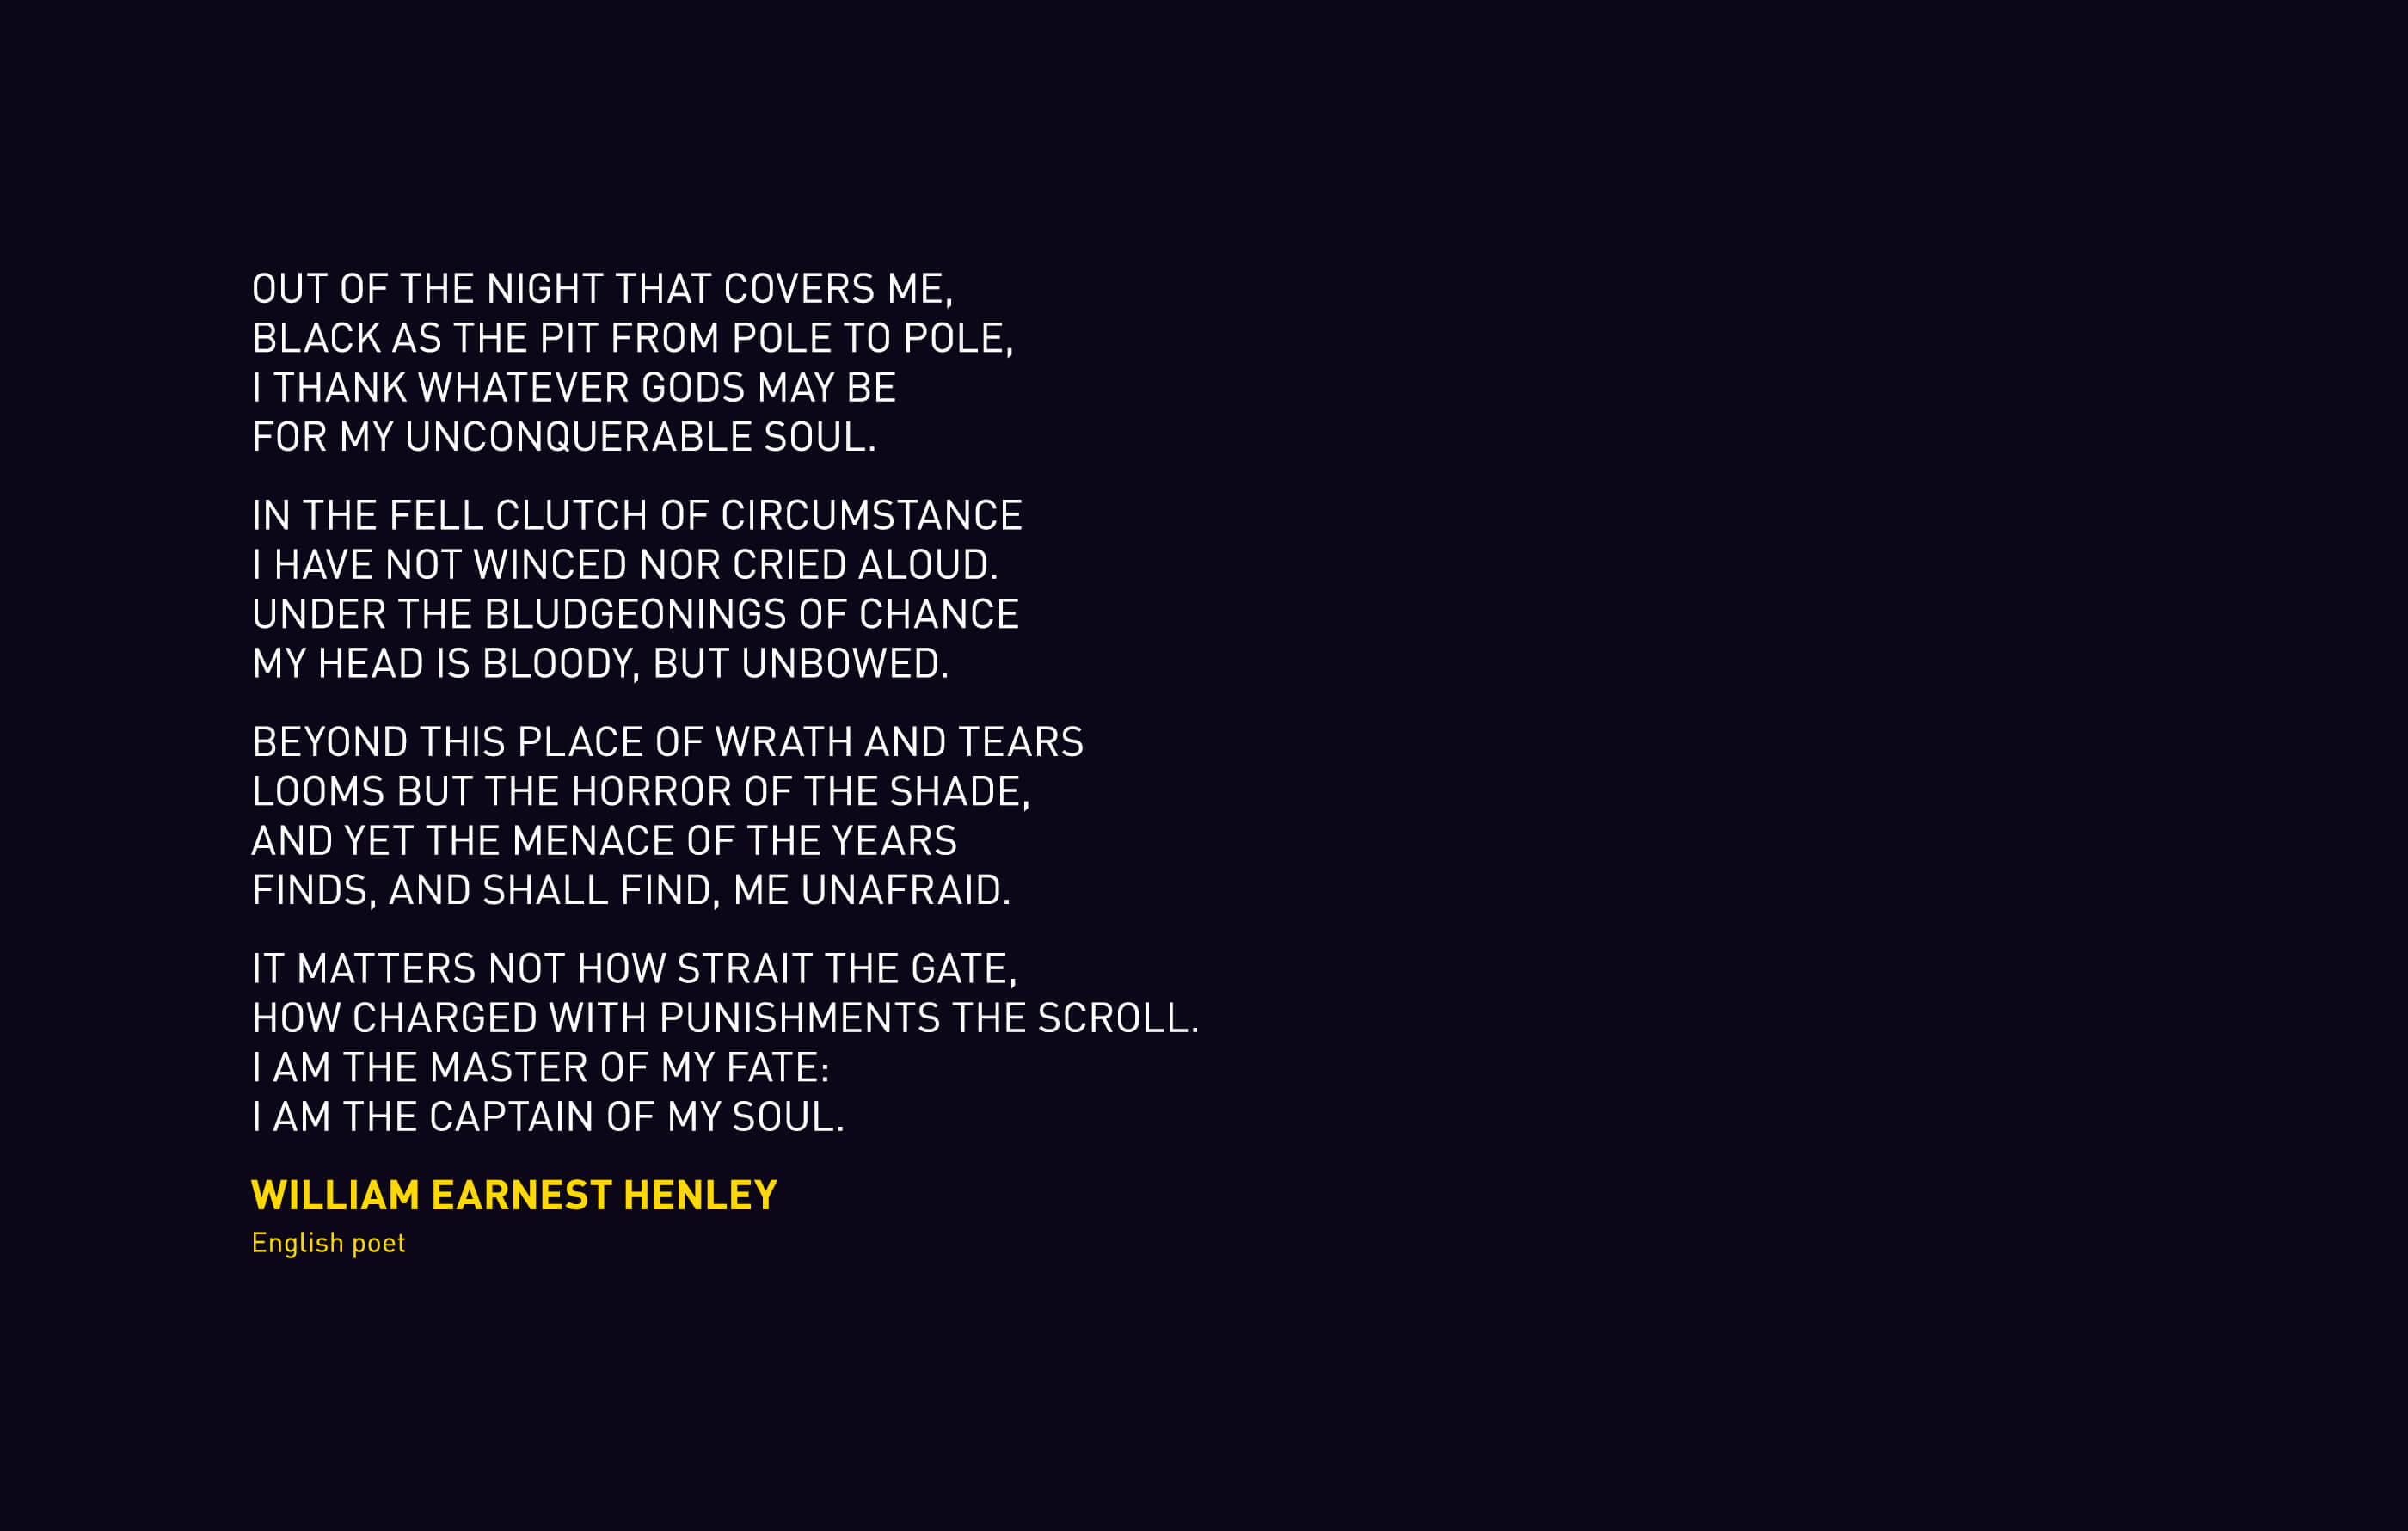 An inspirational quote from William Ernest Henley, an English poet, in white and yellow writing on a black background